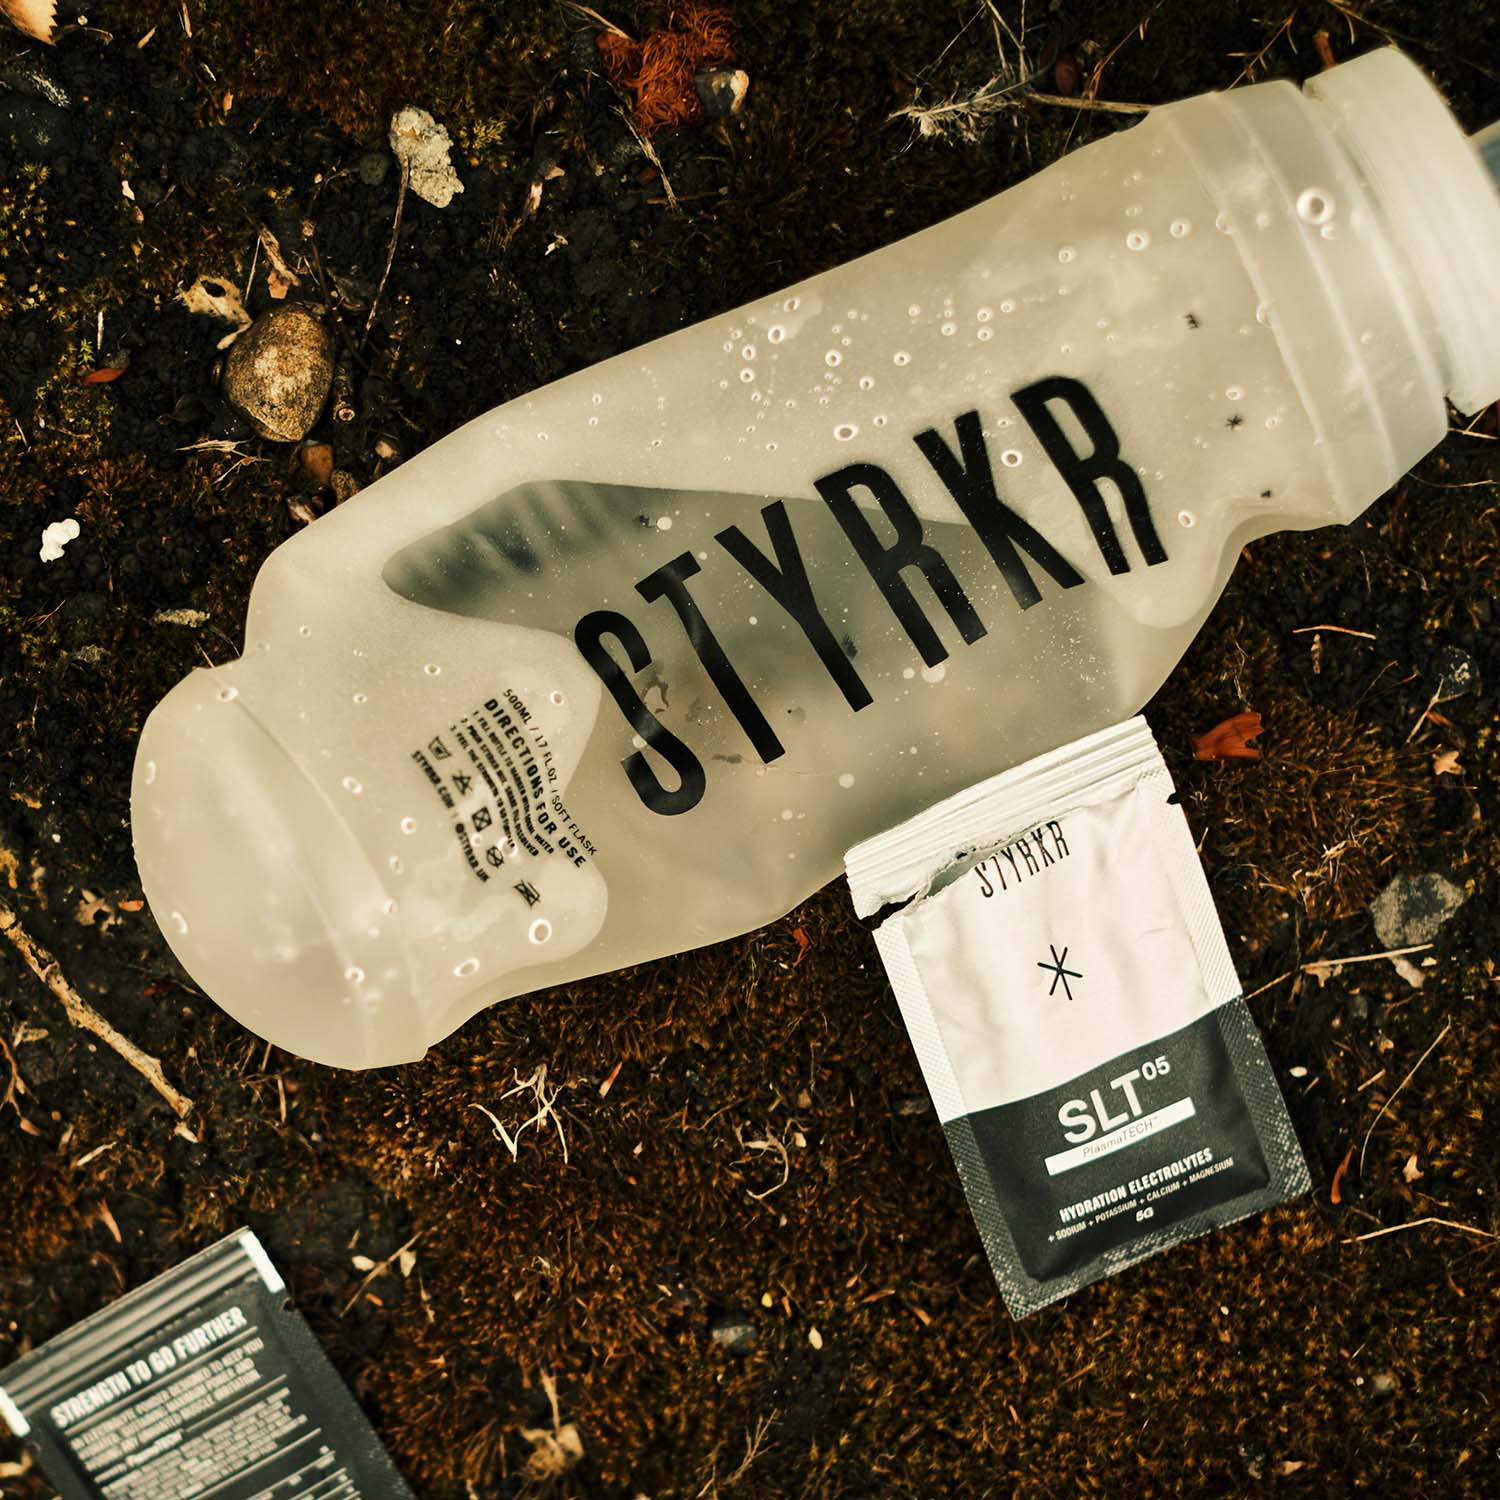 STYRKR trail bottle and slt mix in the grit